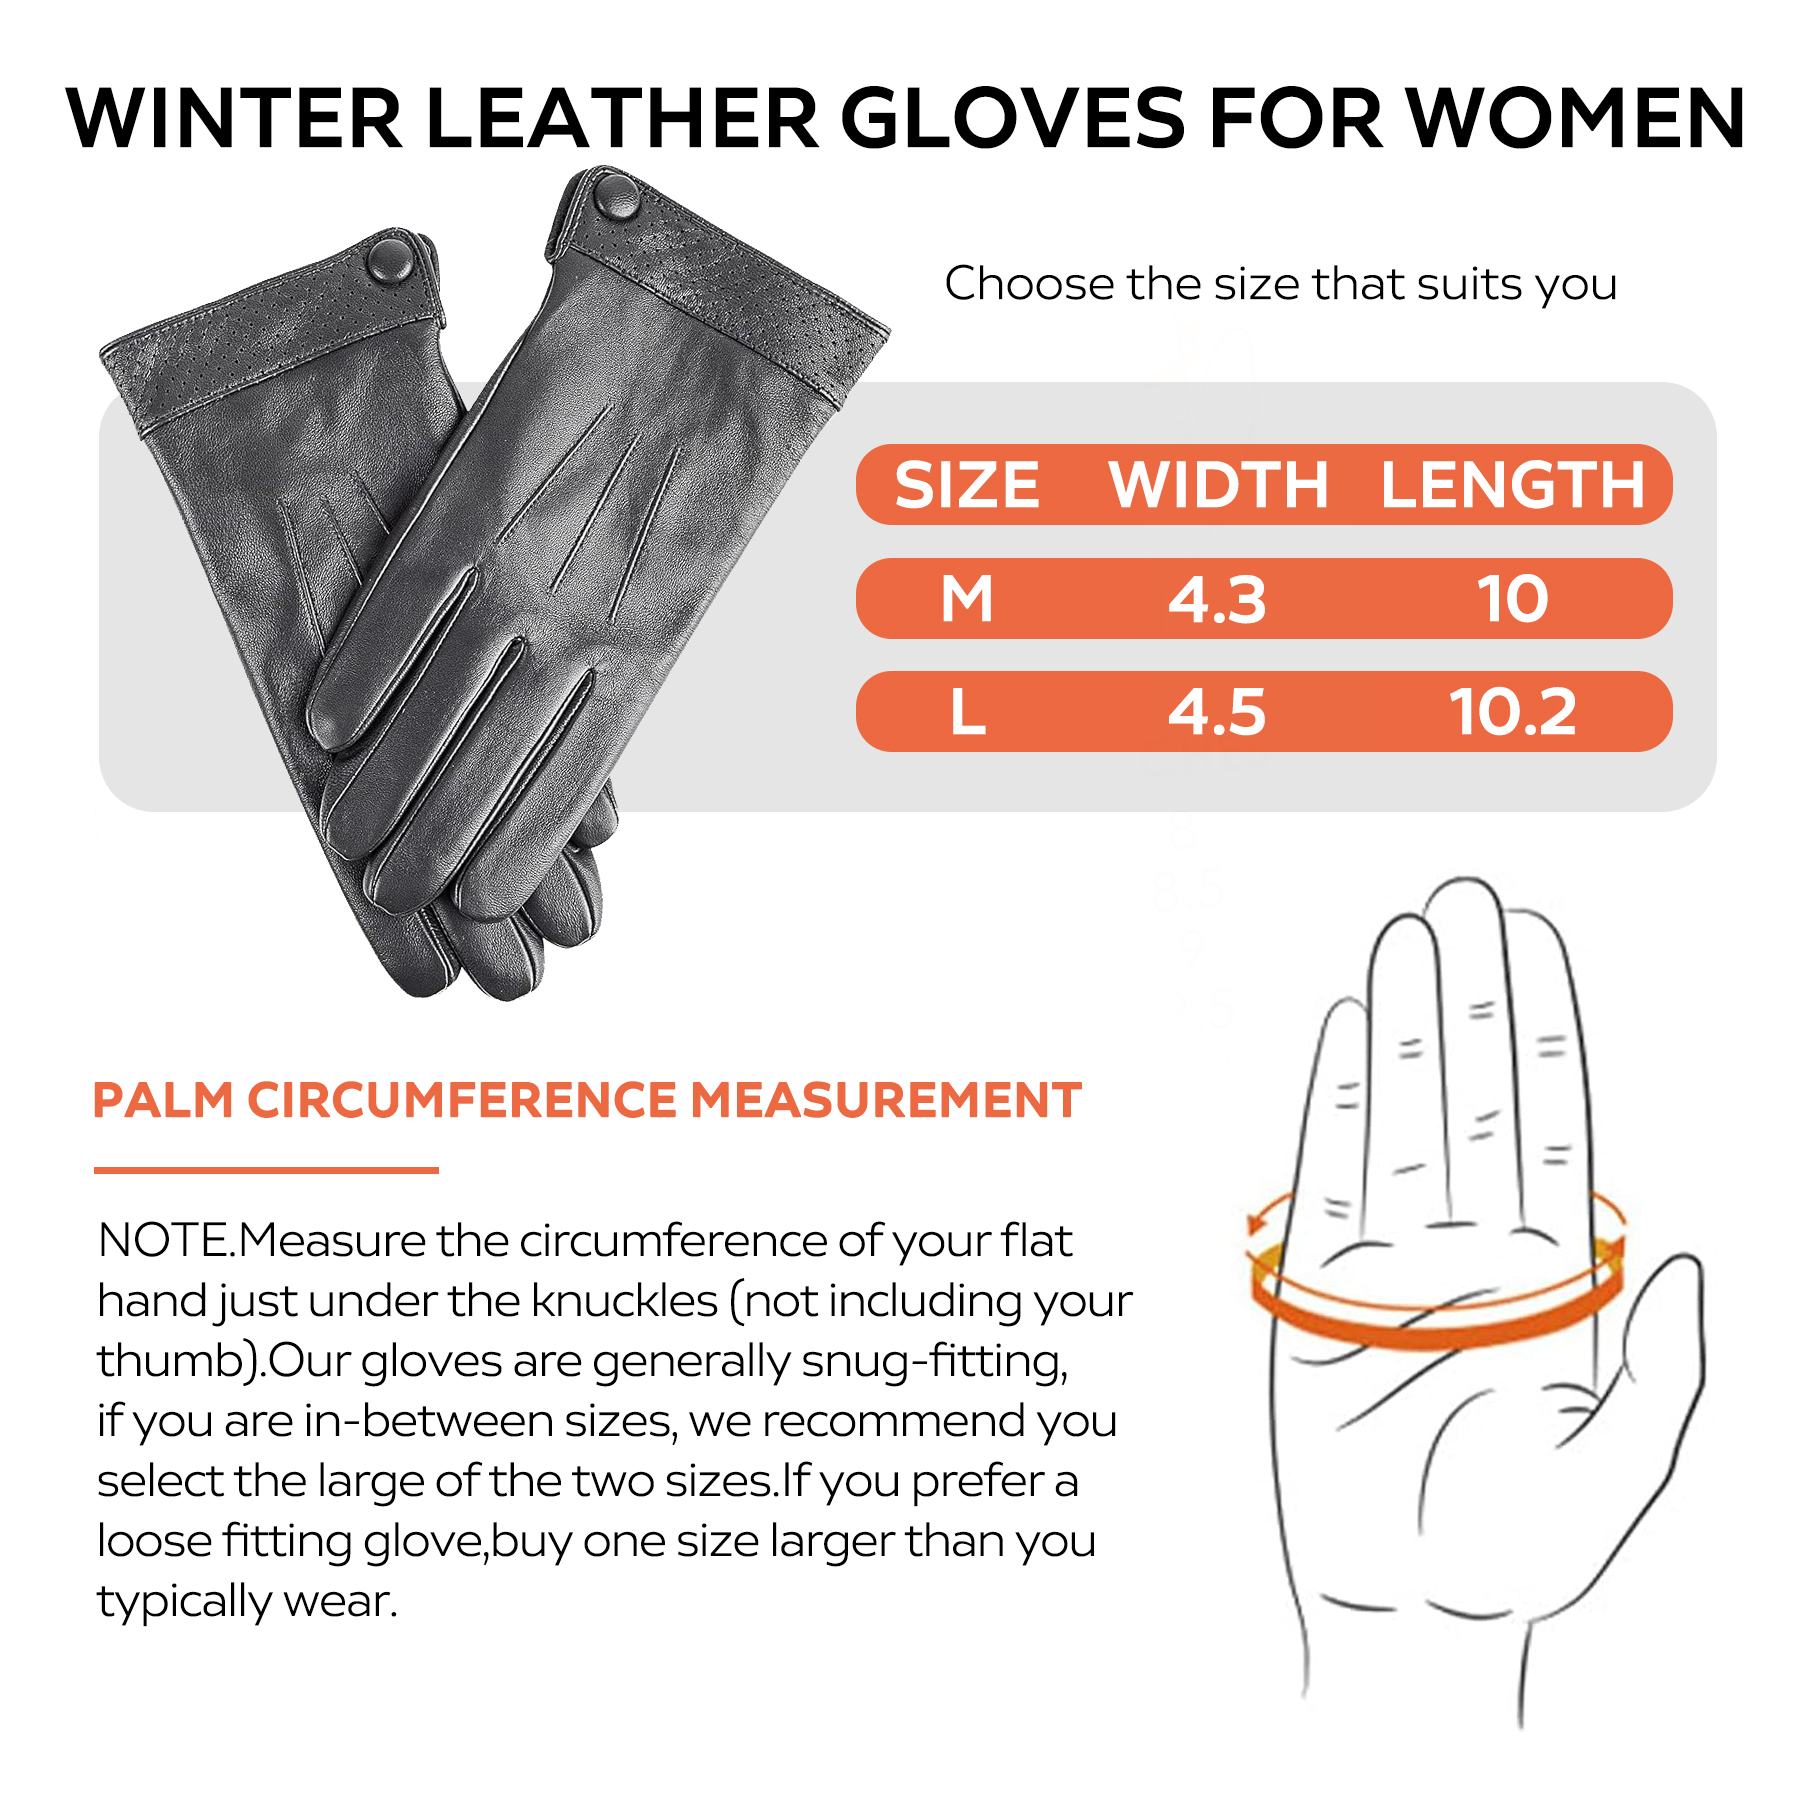 Whiteleopard Men's Winter Sheepskin Leather Gloves, Toasty Touchscreen Texting with Cashmere Lining, Ideal for Driving and Motorcycle Riding - image 3 of 7